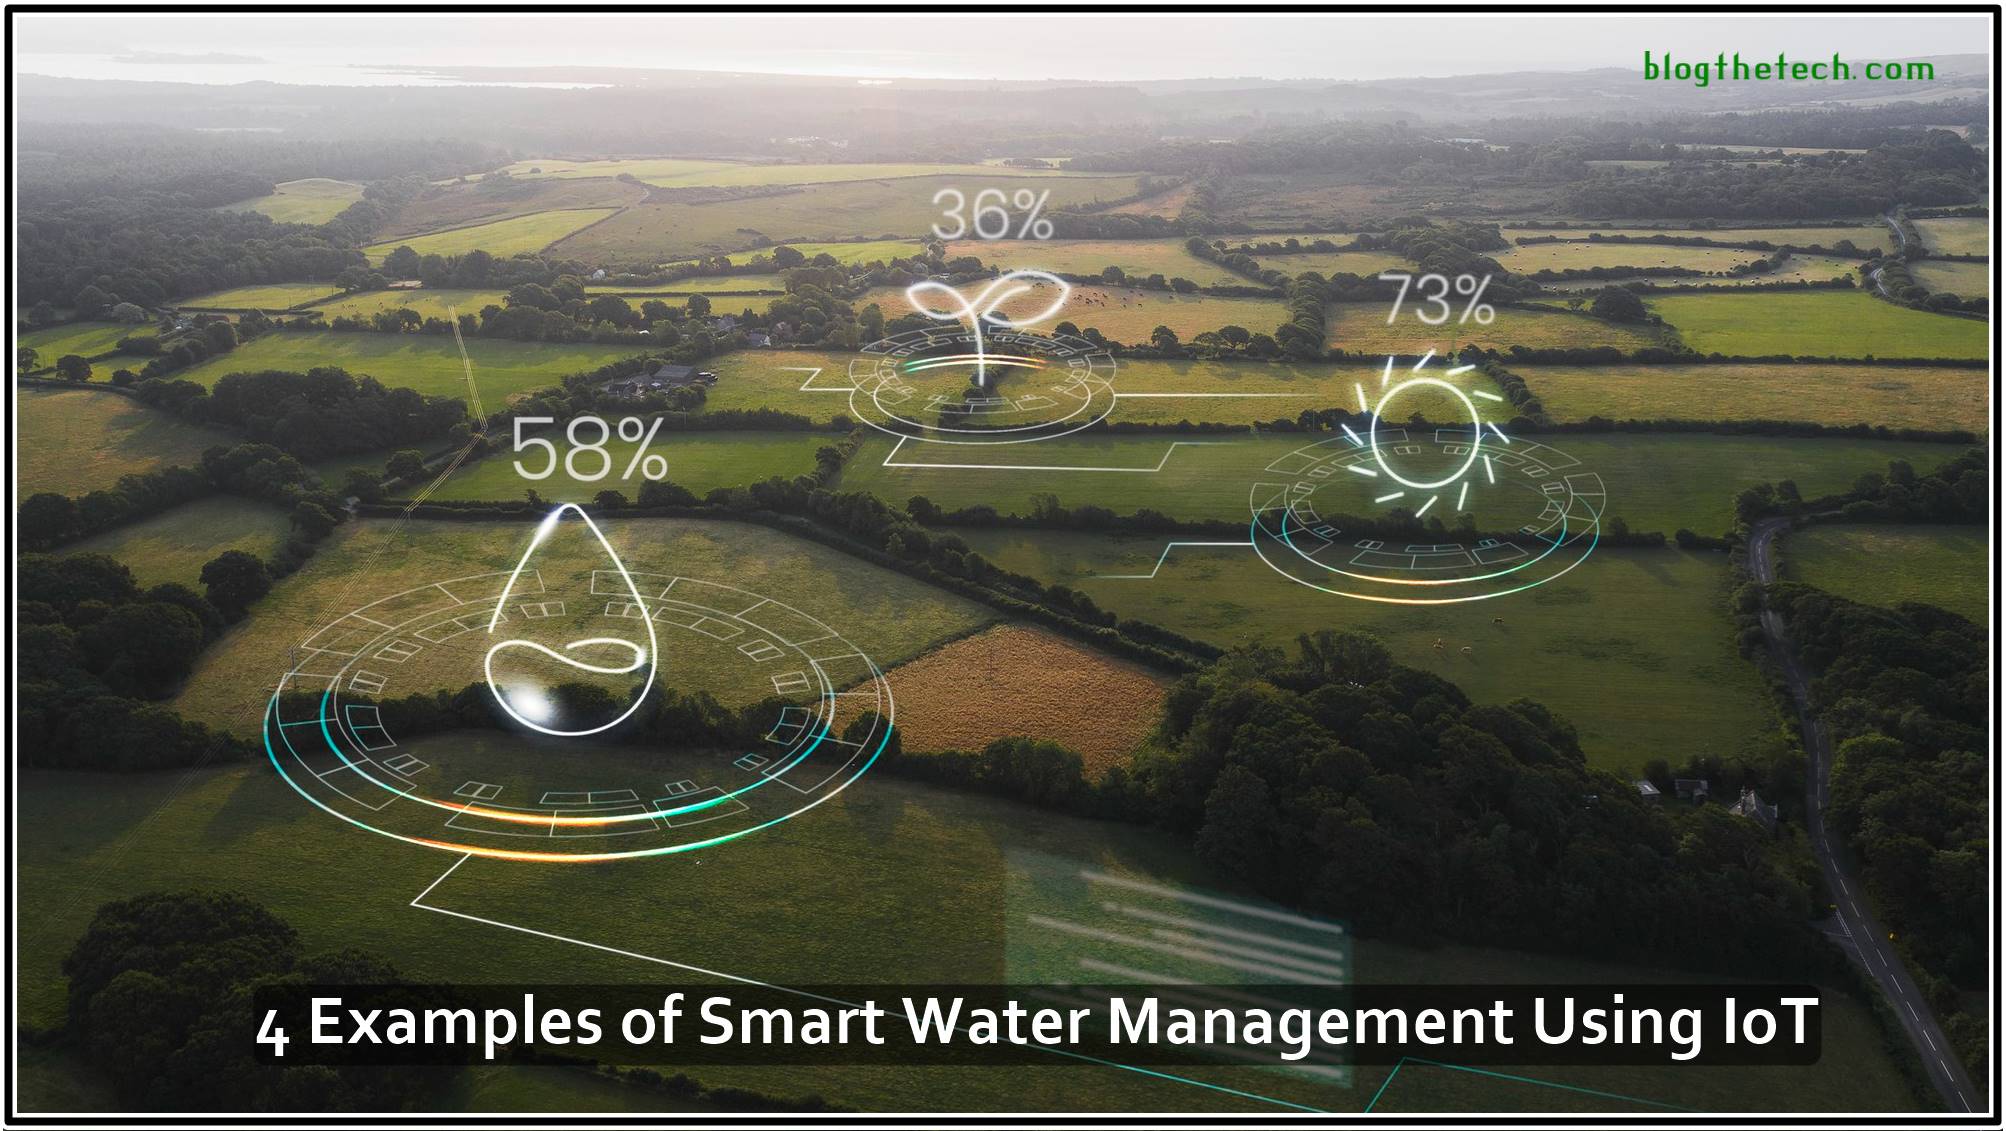 4 Examples of Smart Water Management Using IoT